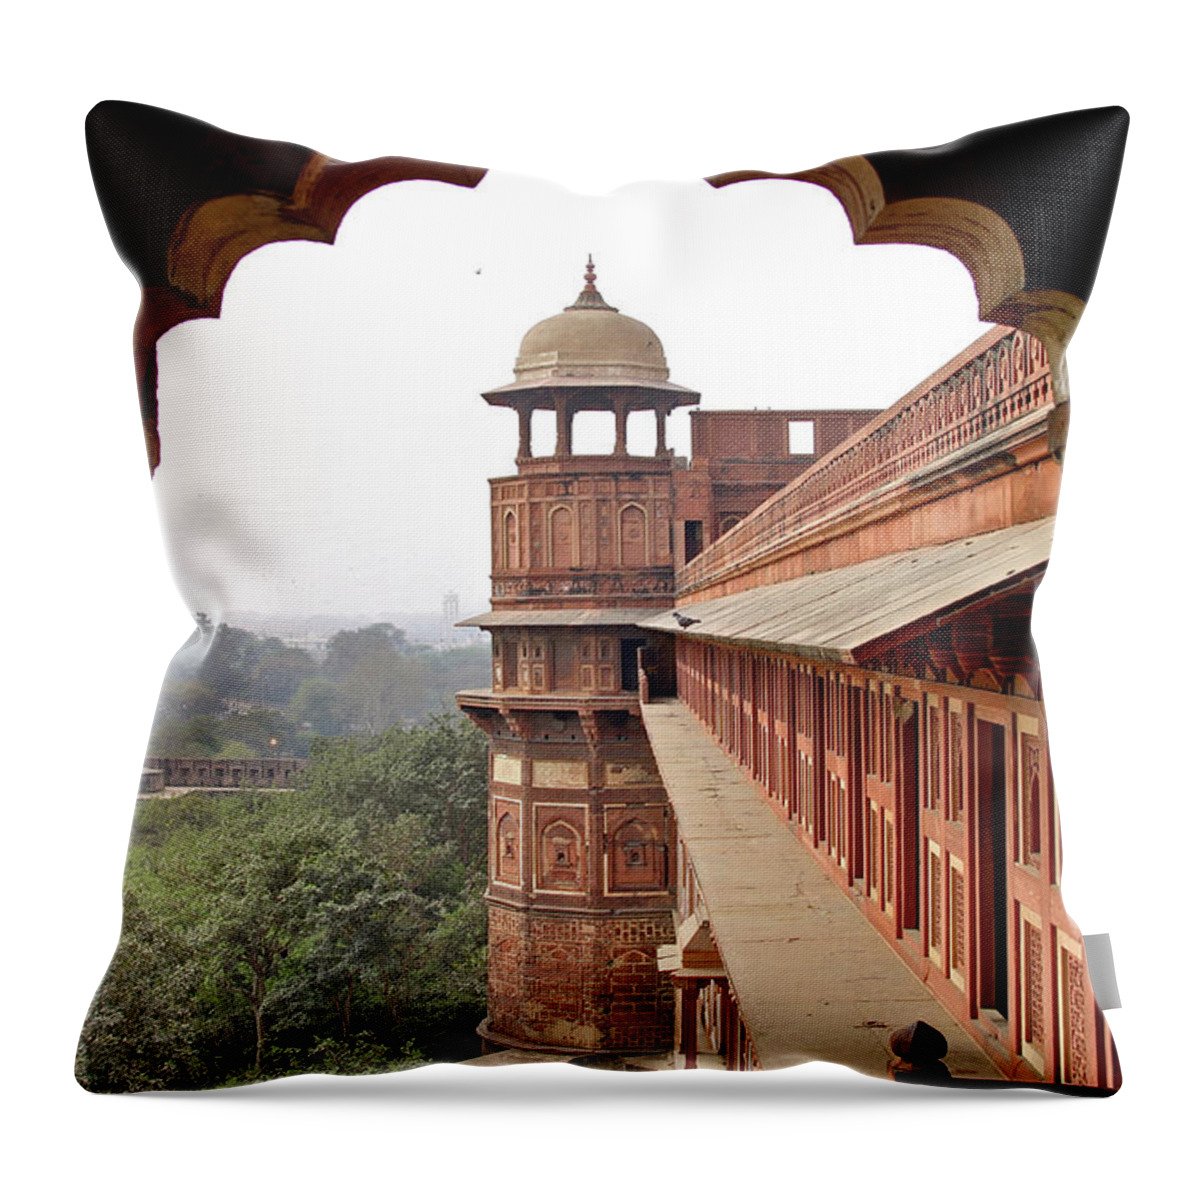 Arch Throw Pillow featuring the photograph Loving Indian Architecture by By Aj Brustein